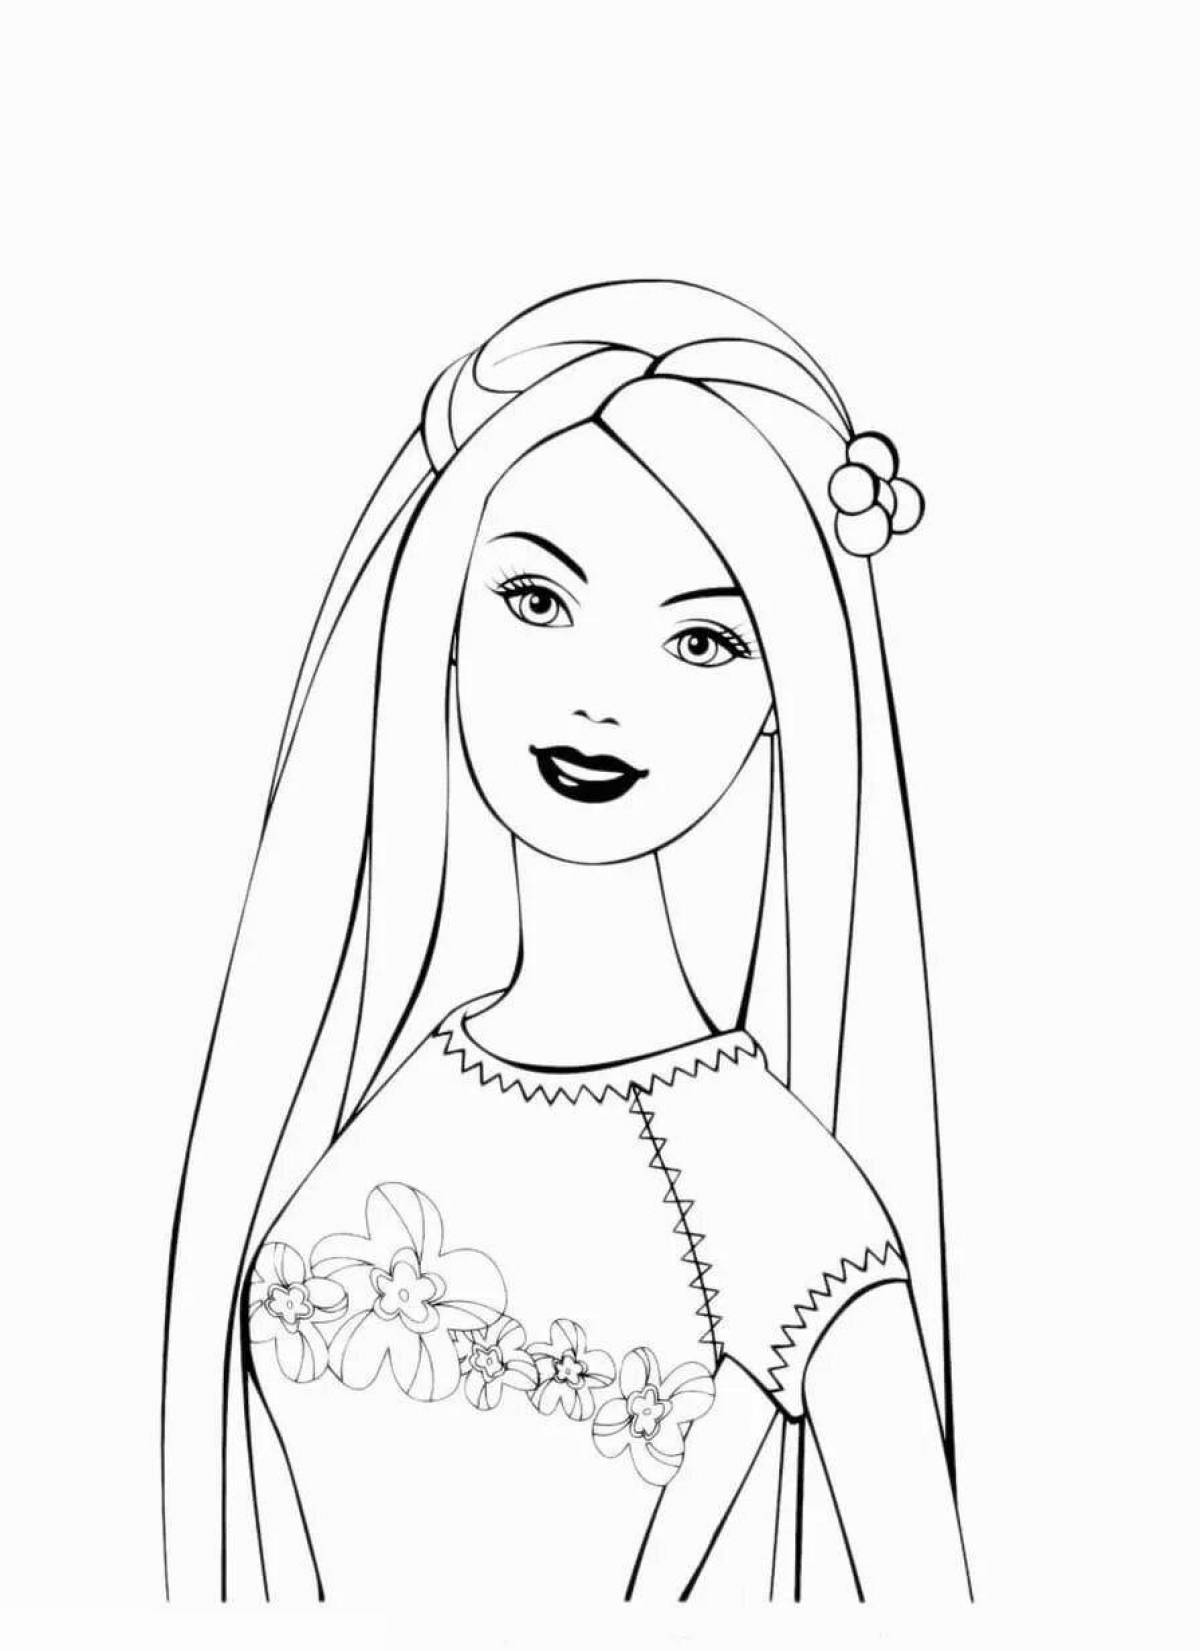 Amazing coloring pages for girls for kids